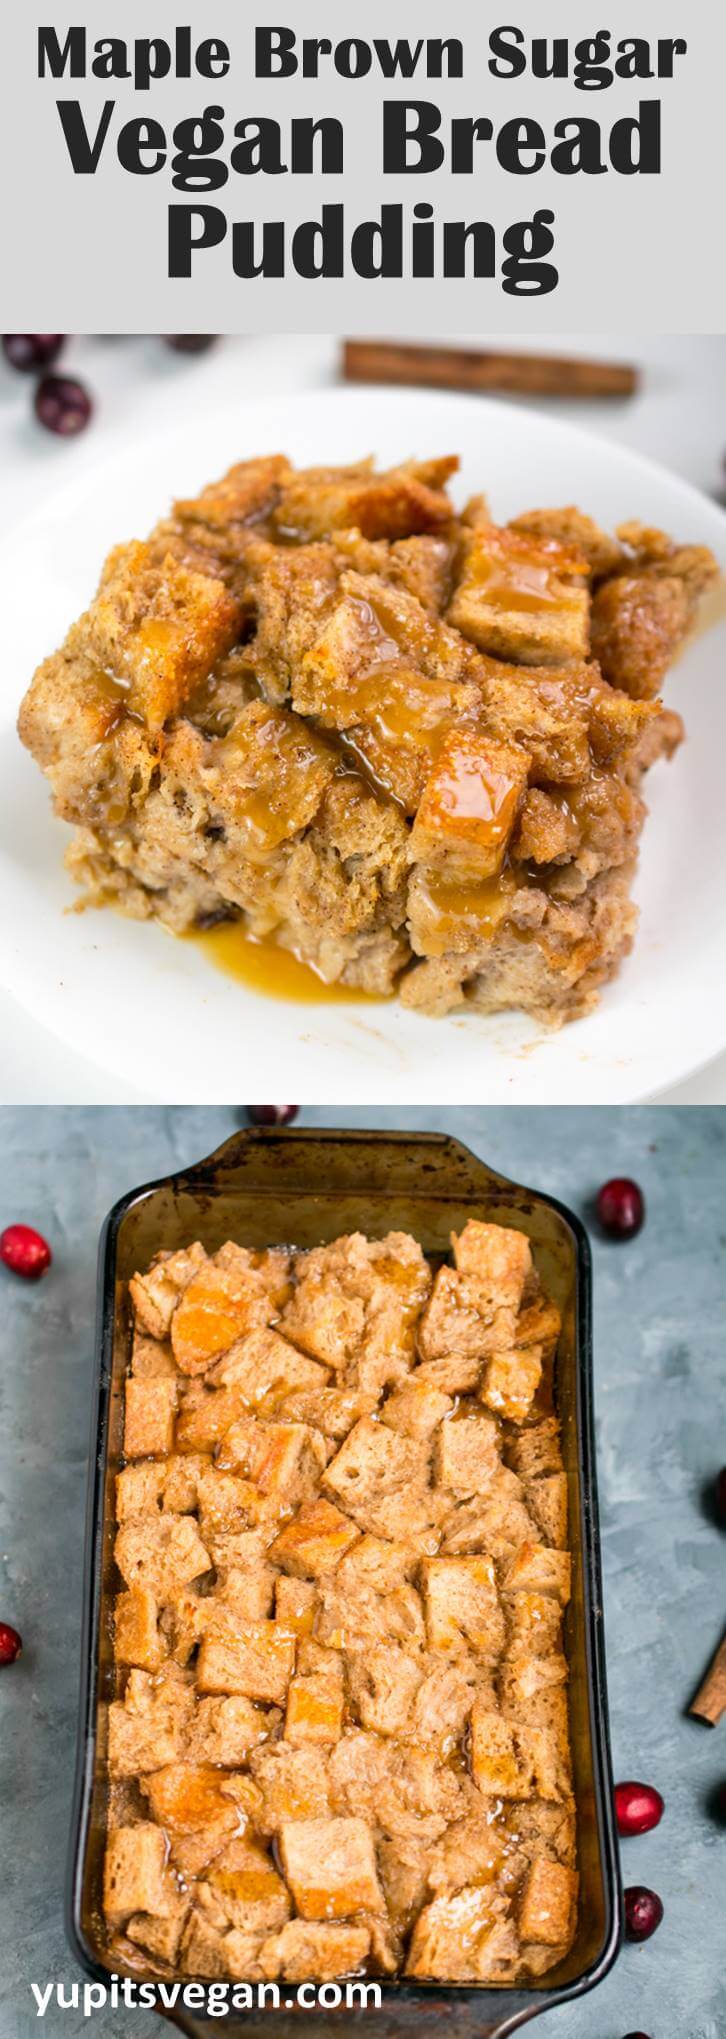 Vegan Bread Pudding with Brown Sugar and Maple | Yup, it's Vegan